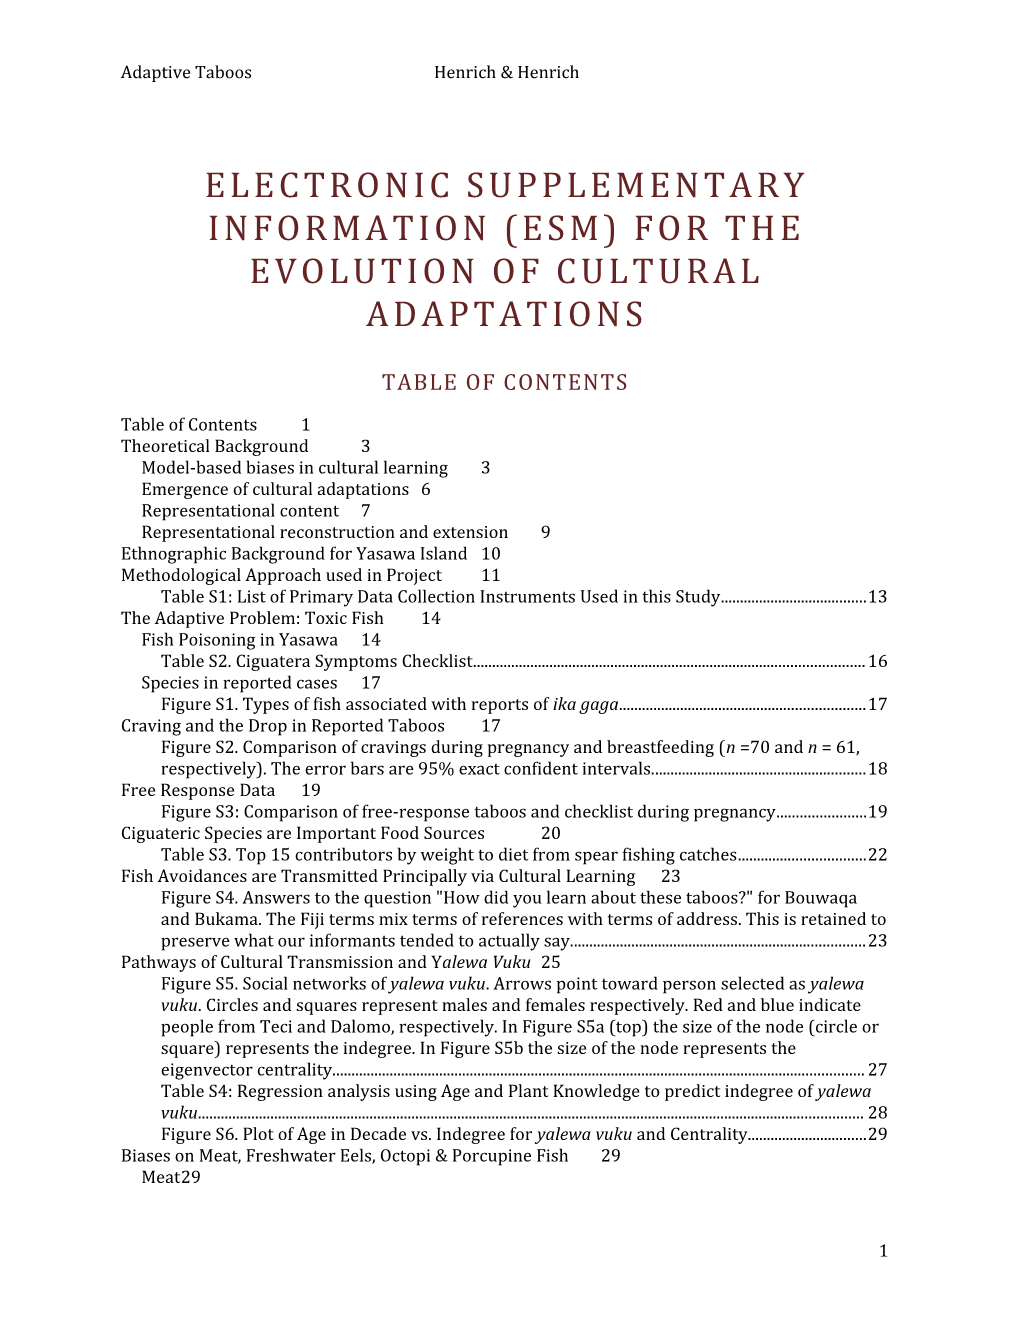 Electronic Supplementaryinformation (ESM) for the Evolution of Cultural Adaptations